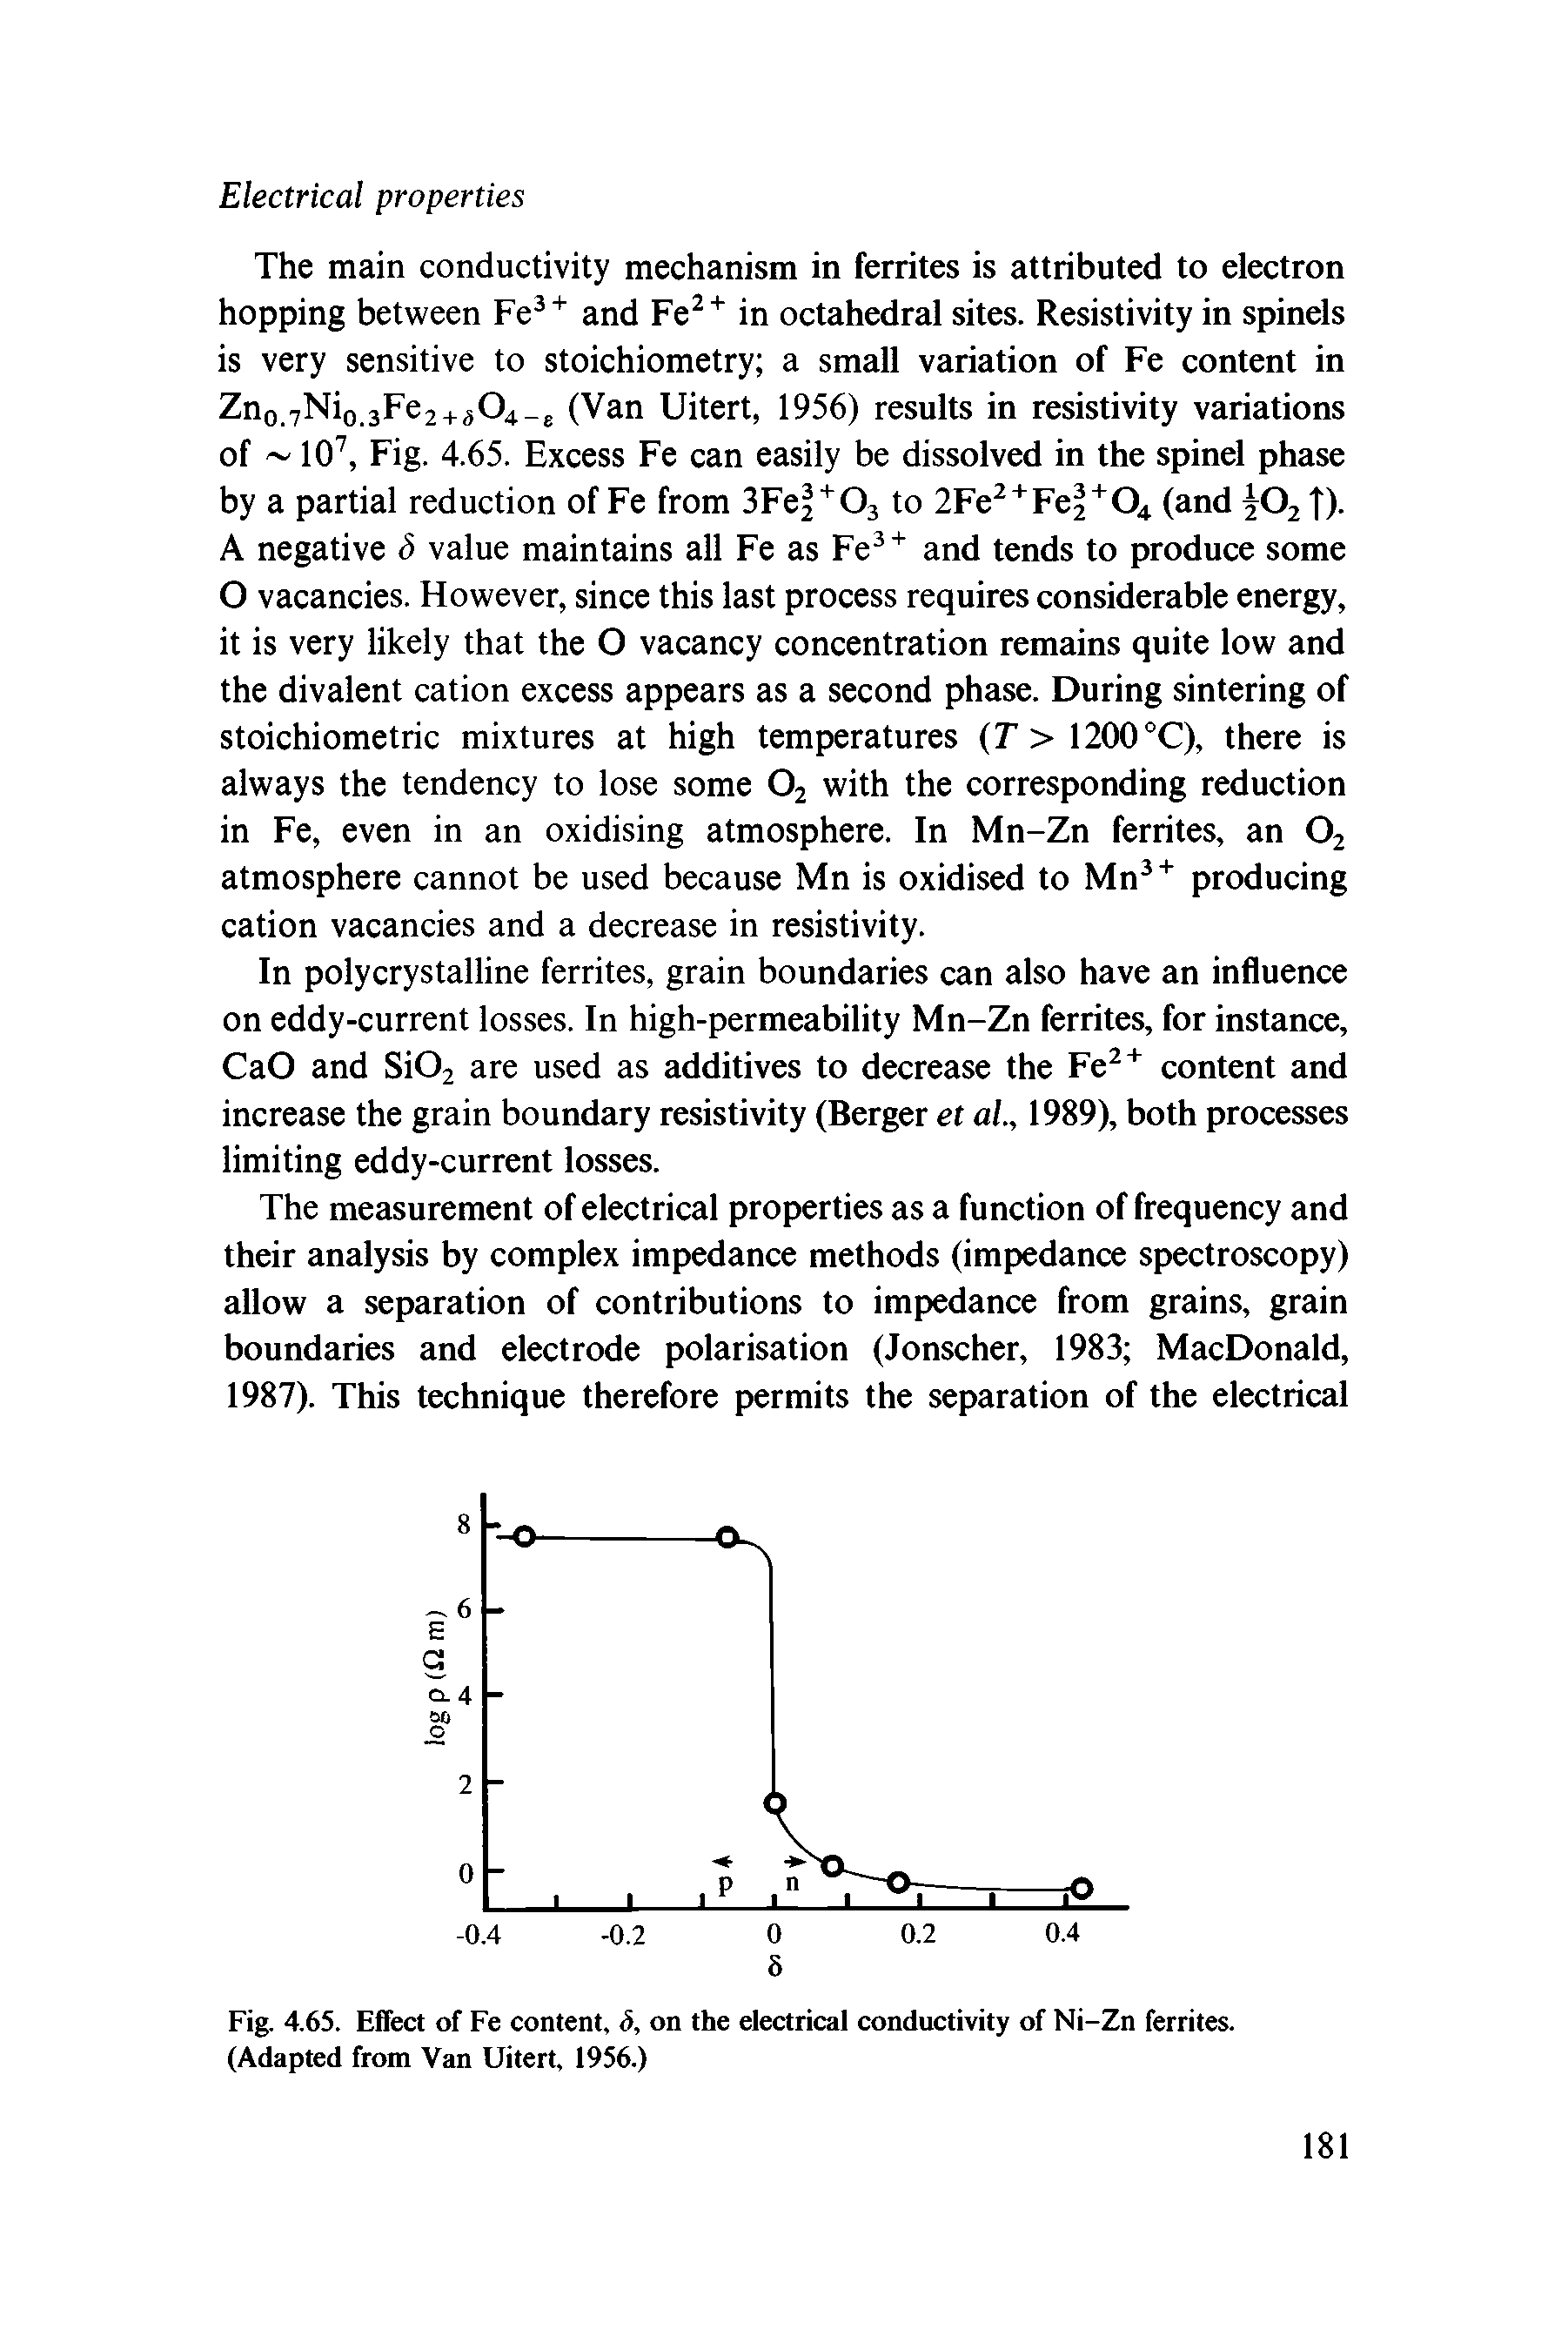 Fig. 4.6S. Effect of Fe content, d, on the electrical conductivity of Ni-Zn ferrites. (Adapted from Van Uitert, 1956.)...